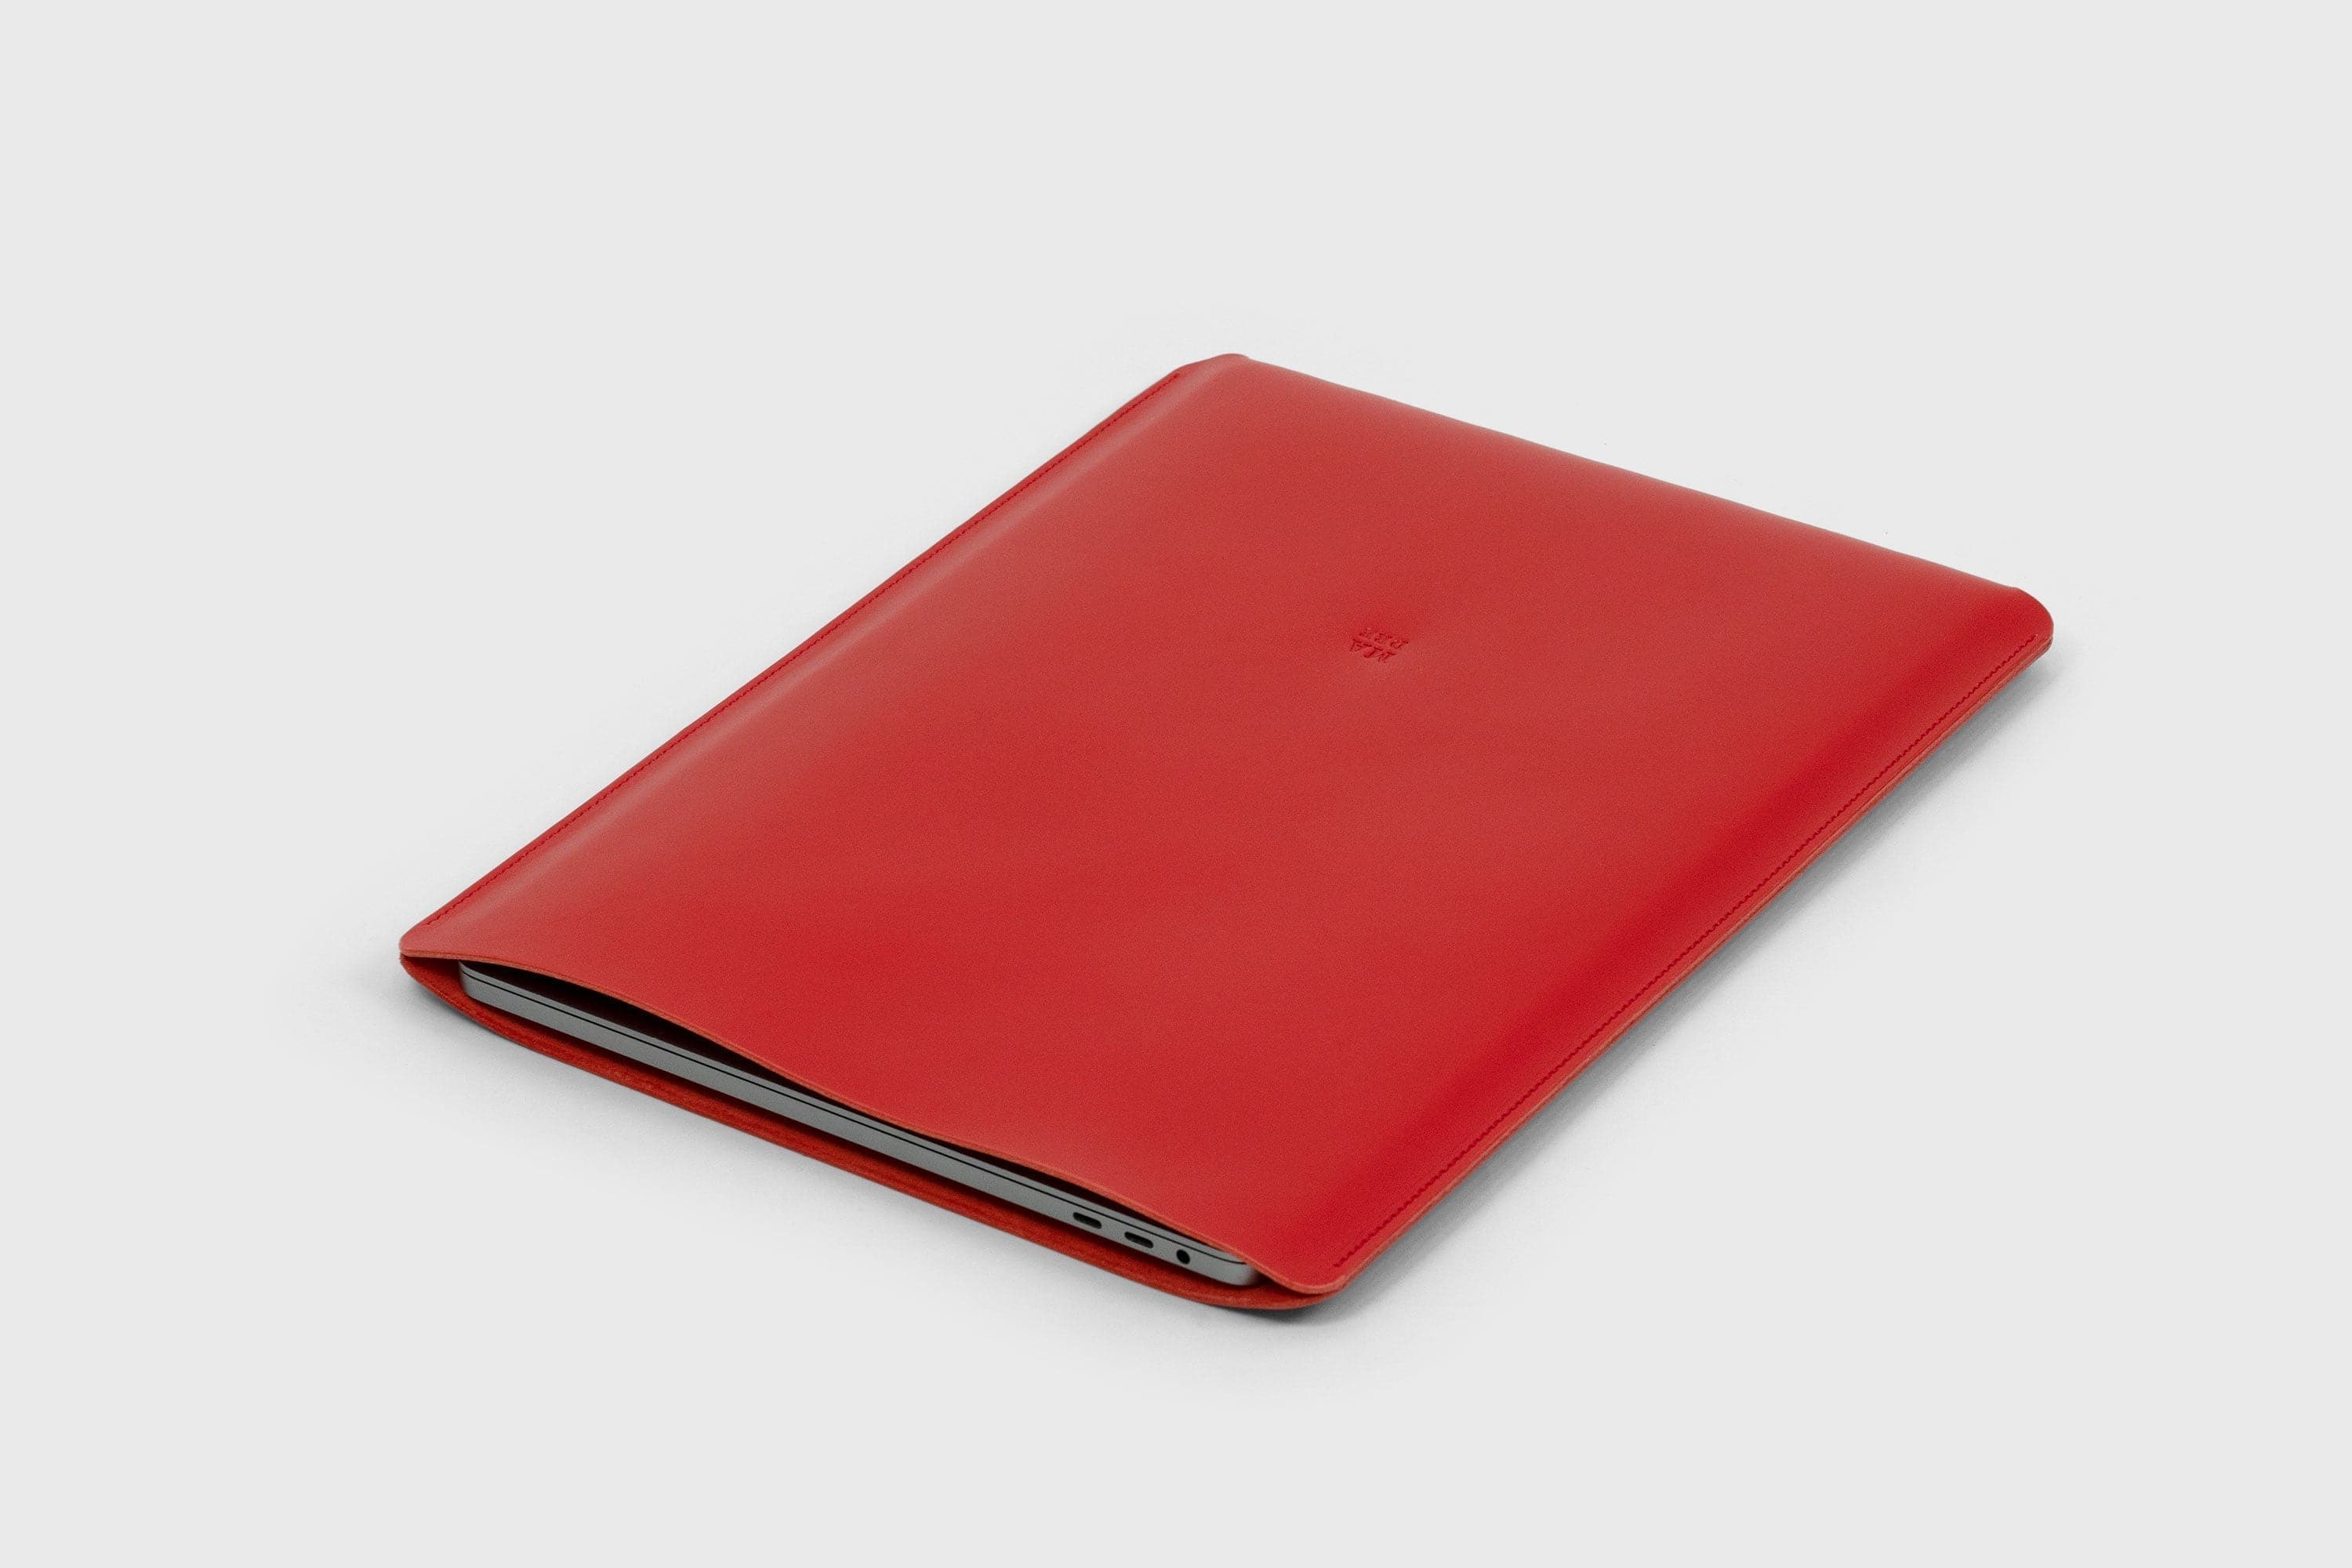 MacBook Pro 16 Inch Leather Slip Sleeve Case Red Vegetable Tanned Full Grain Real Leather Minimalistic Design Premium Quality Manuel Dreesmann Atelier Madre Barcelona